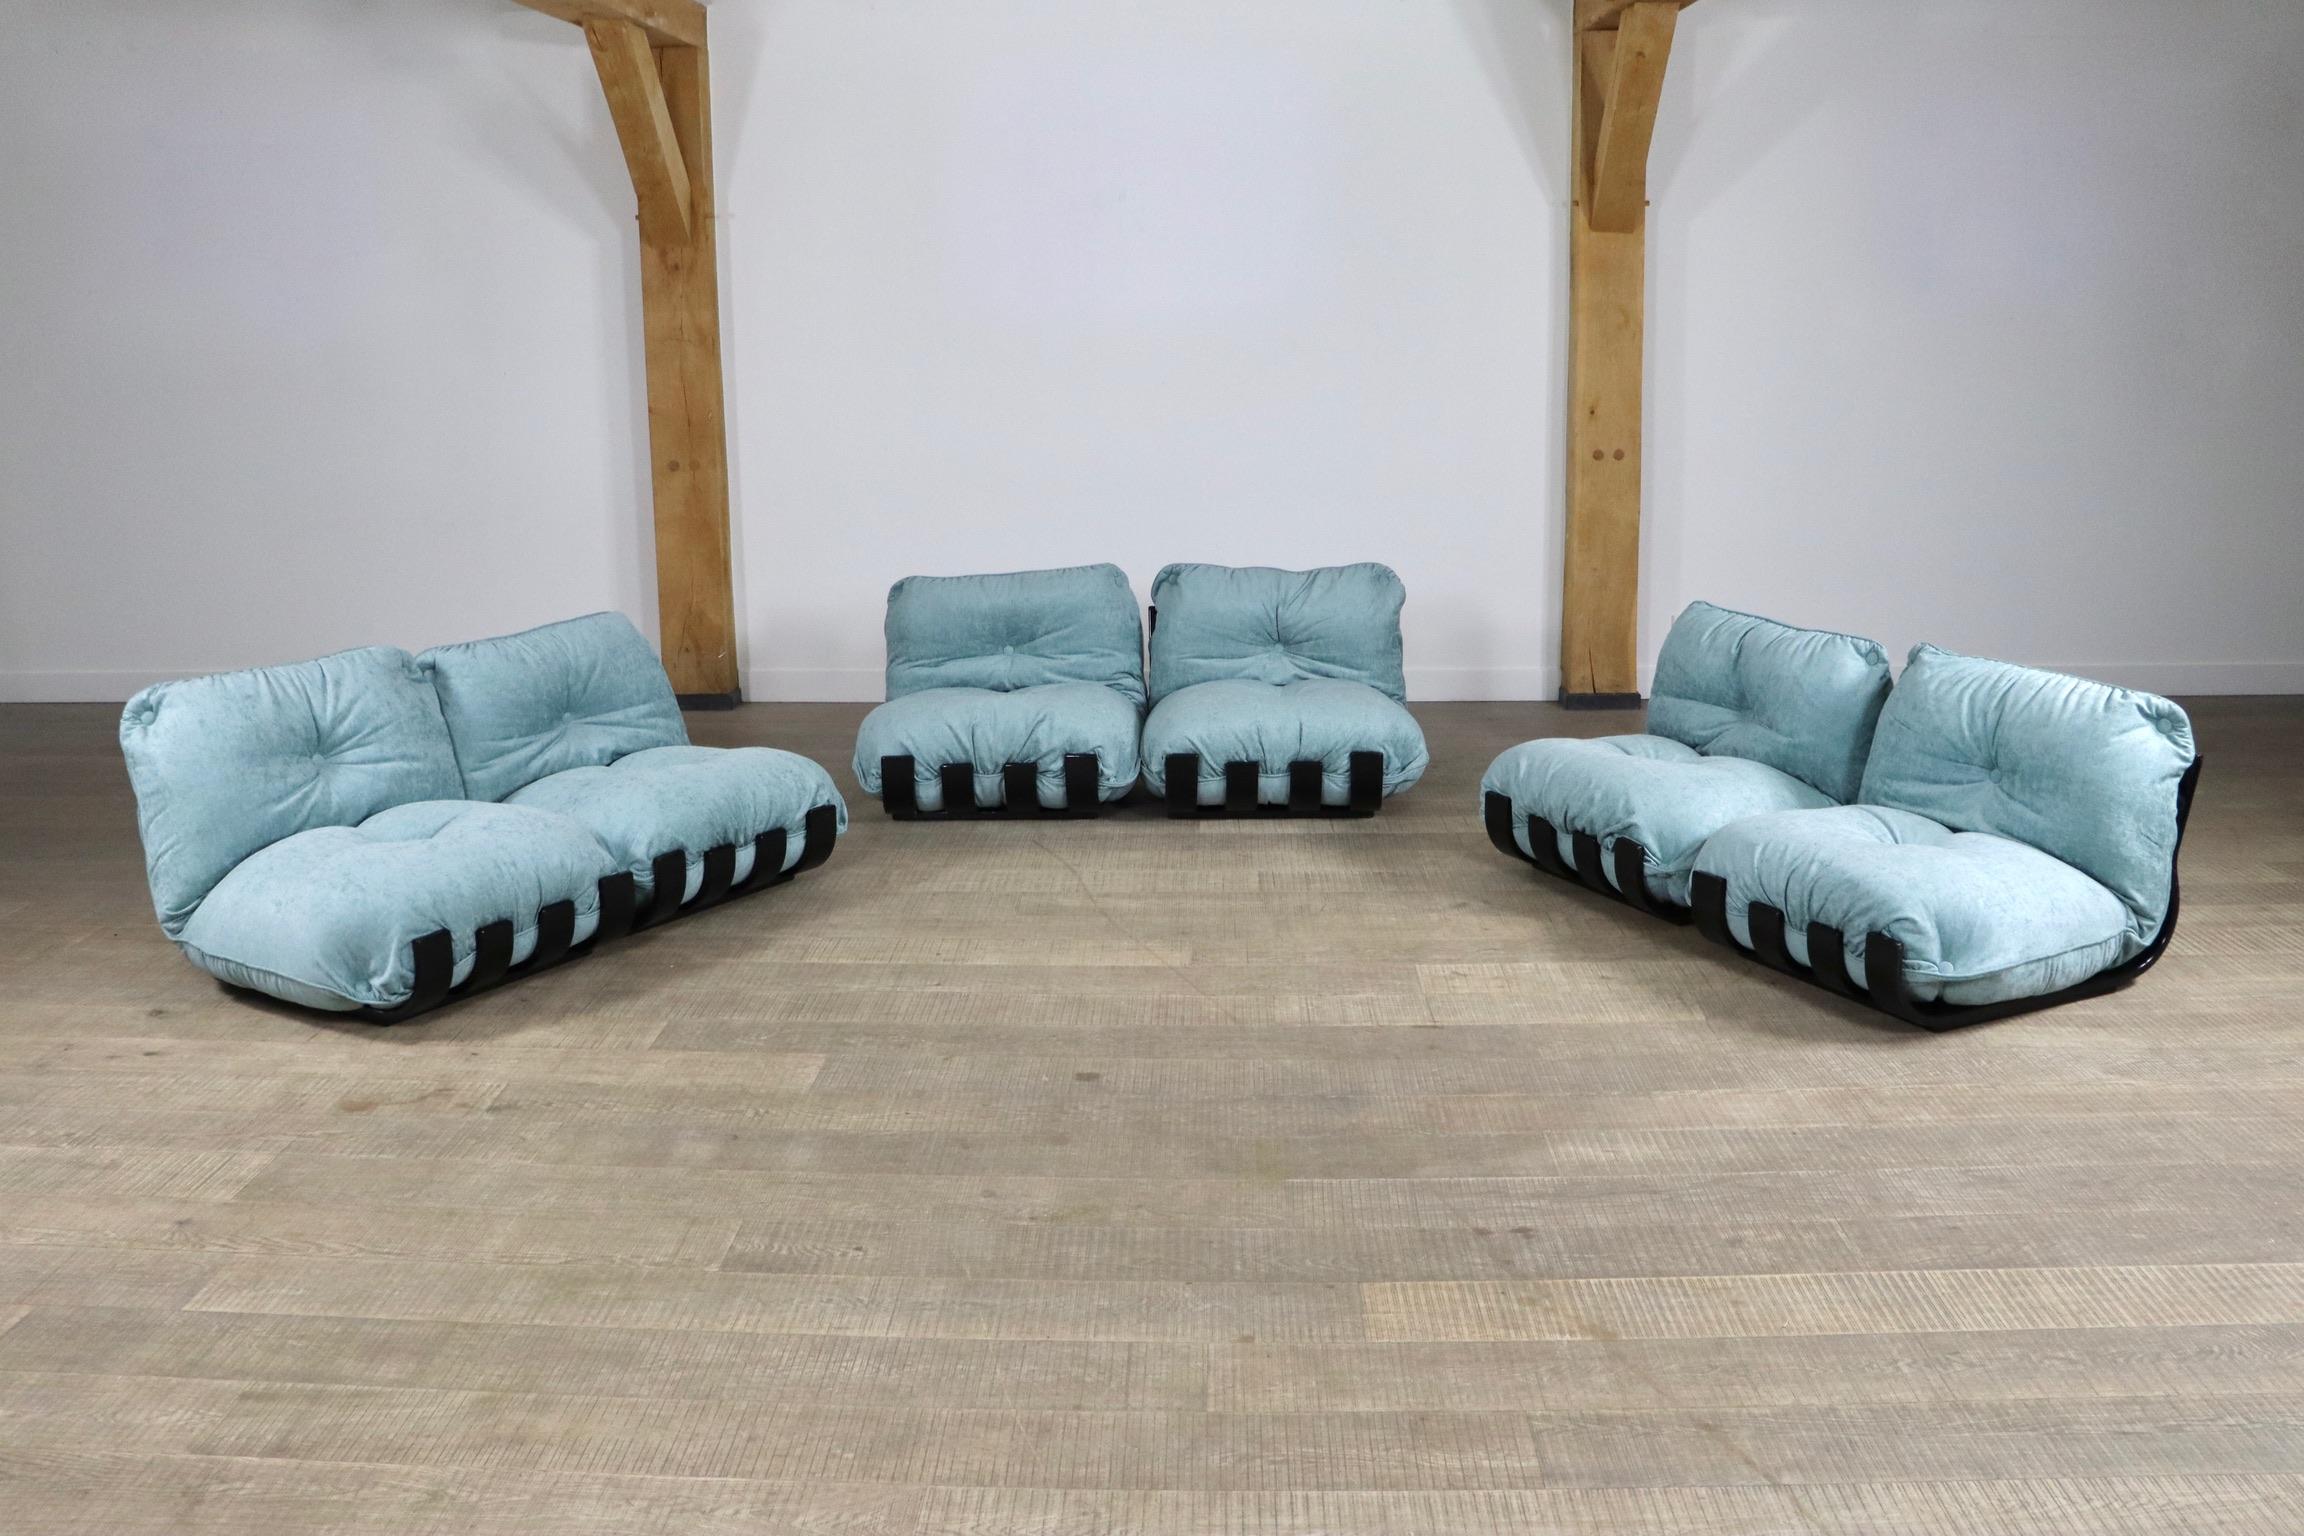 Sectional Gran Visir Sofa in Blue Velvet by Luciano Frigerio, Italy, 1970s For Sale 1